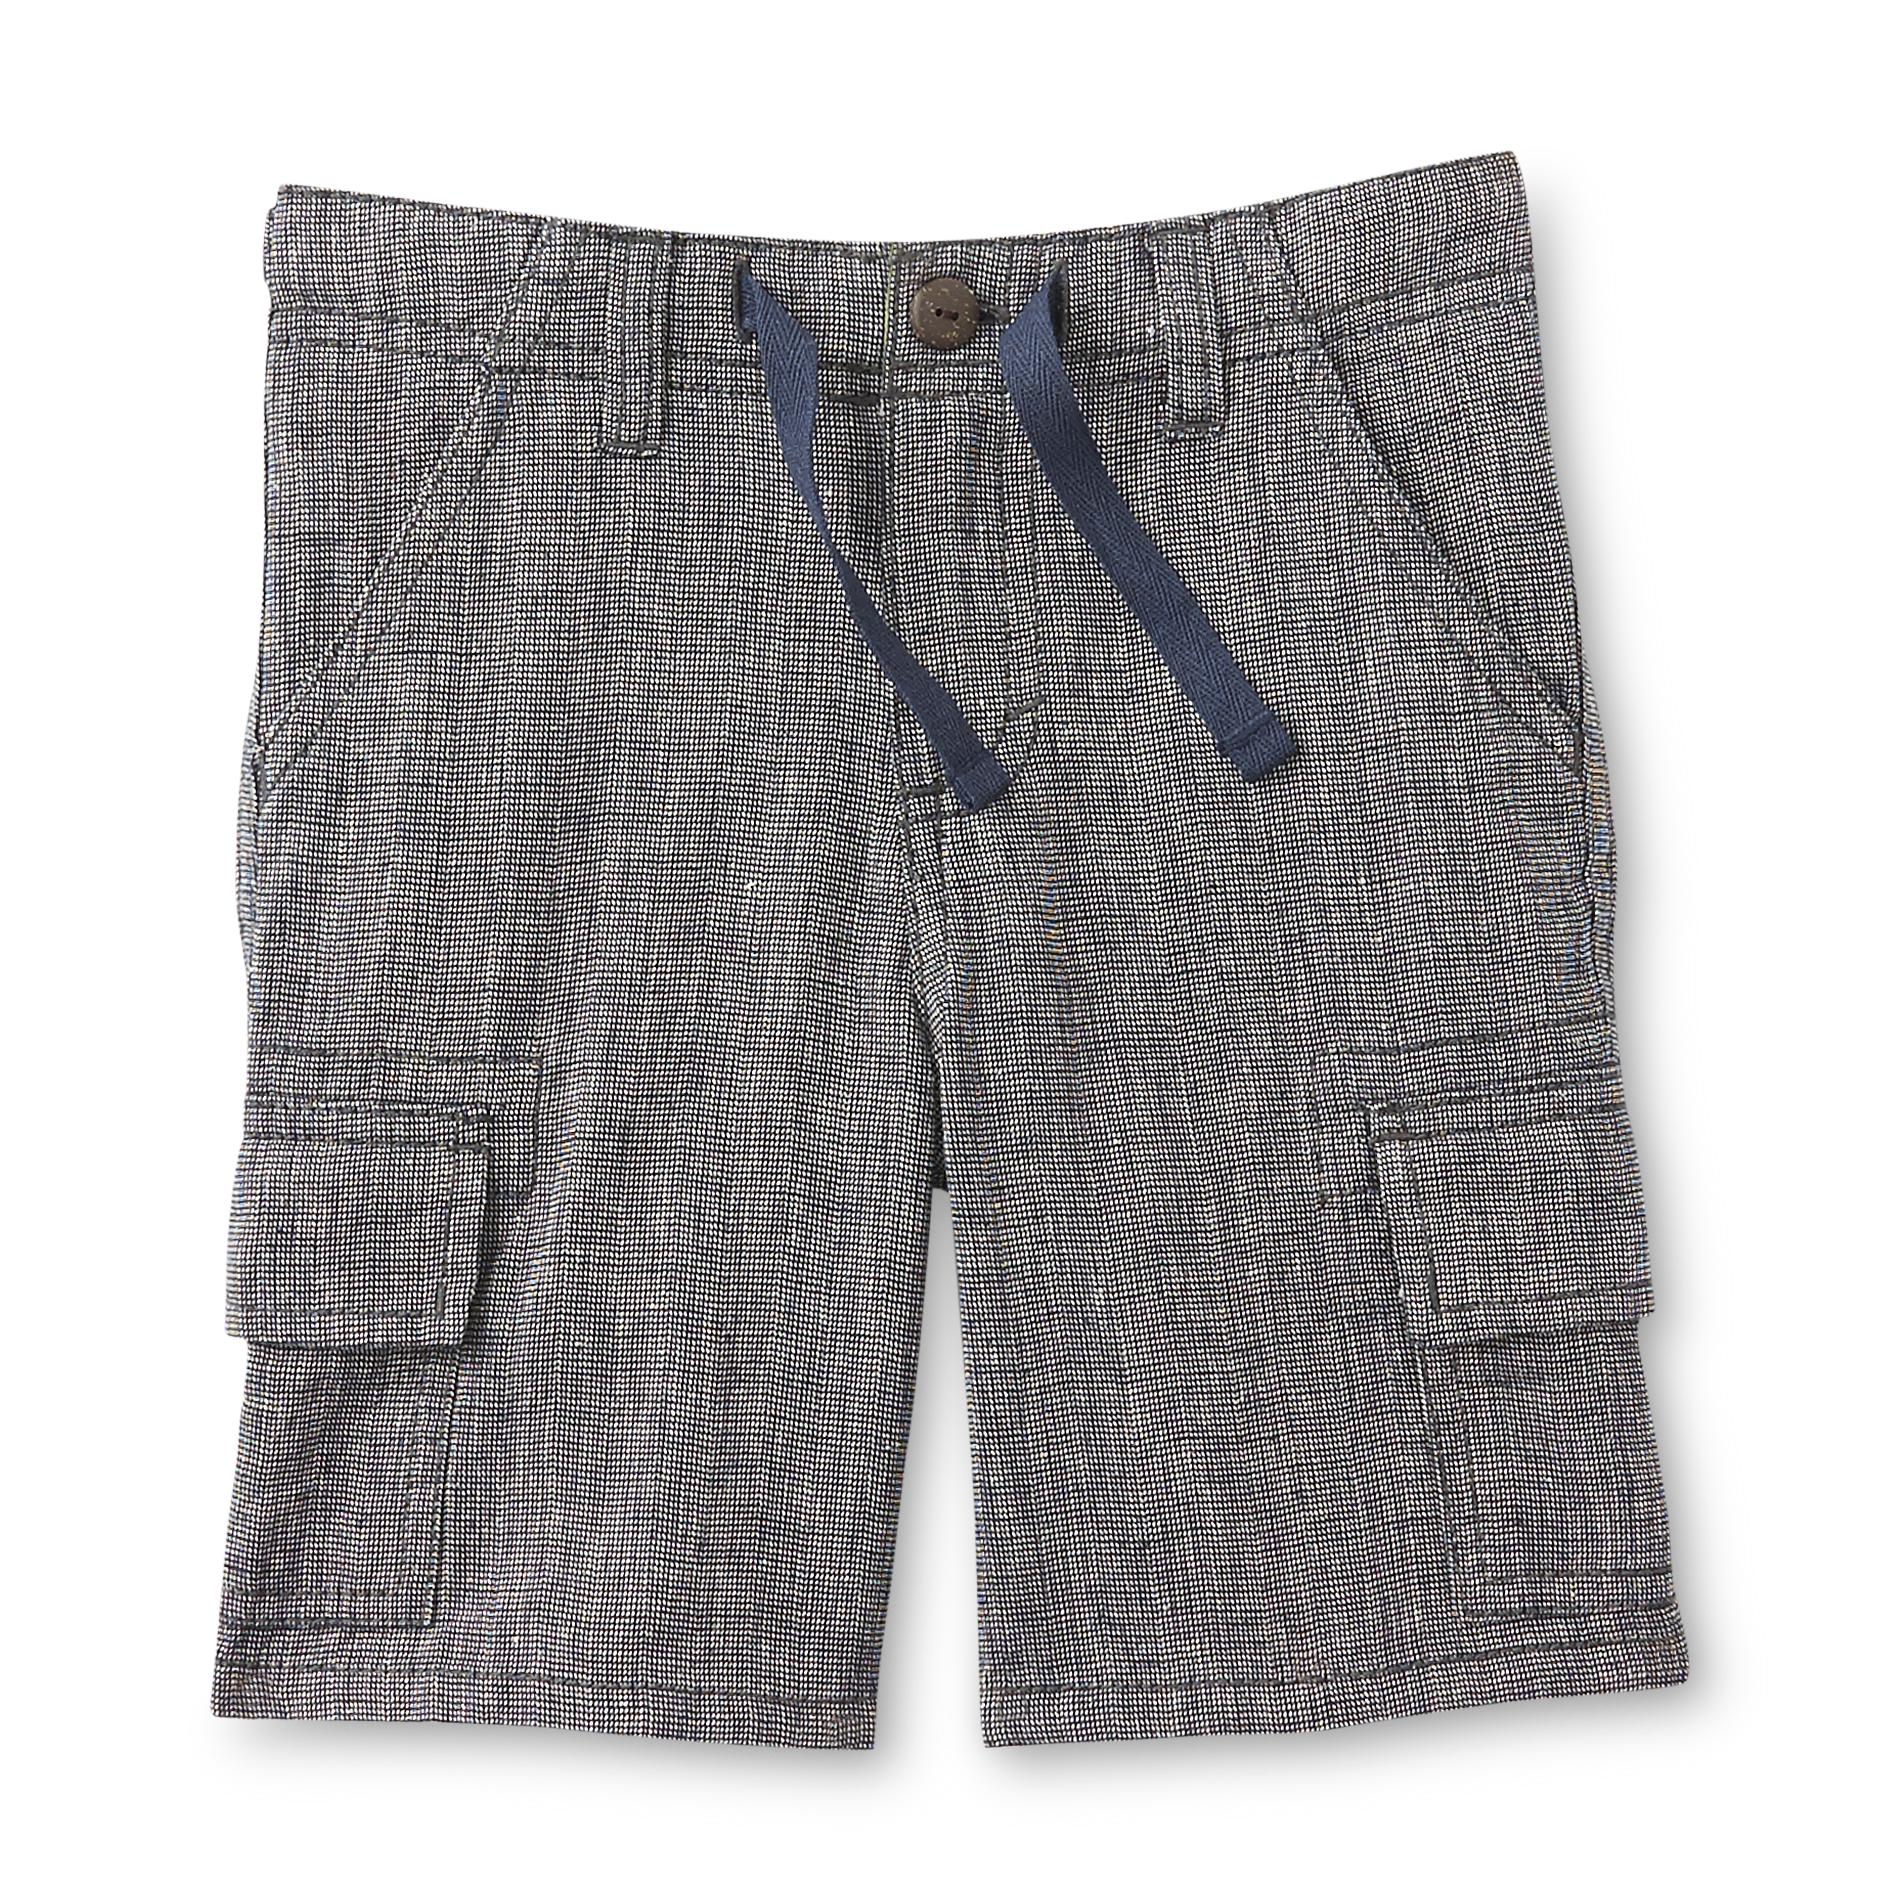 Route 66 Baby Infant & Toddler Boy's Chambray Cargo Shorts